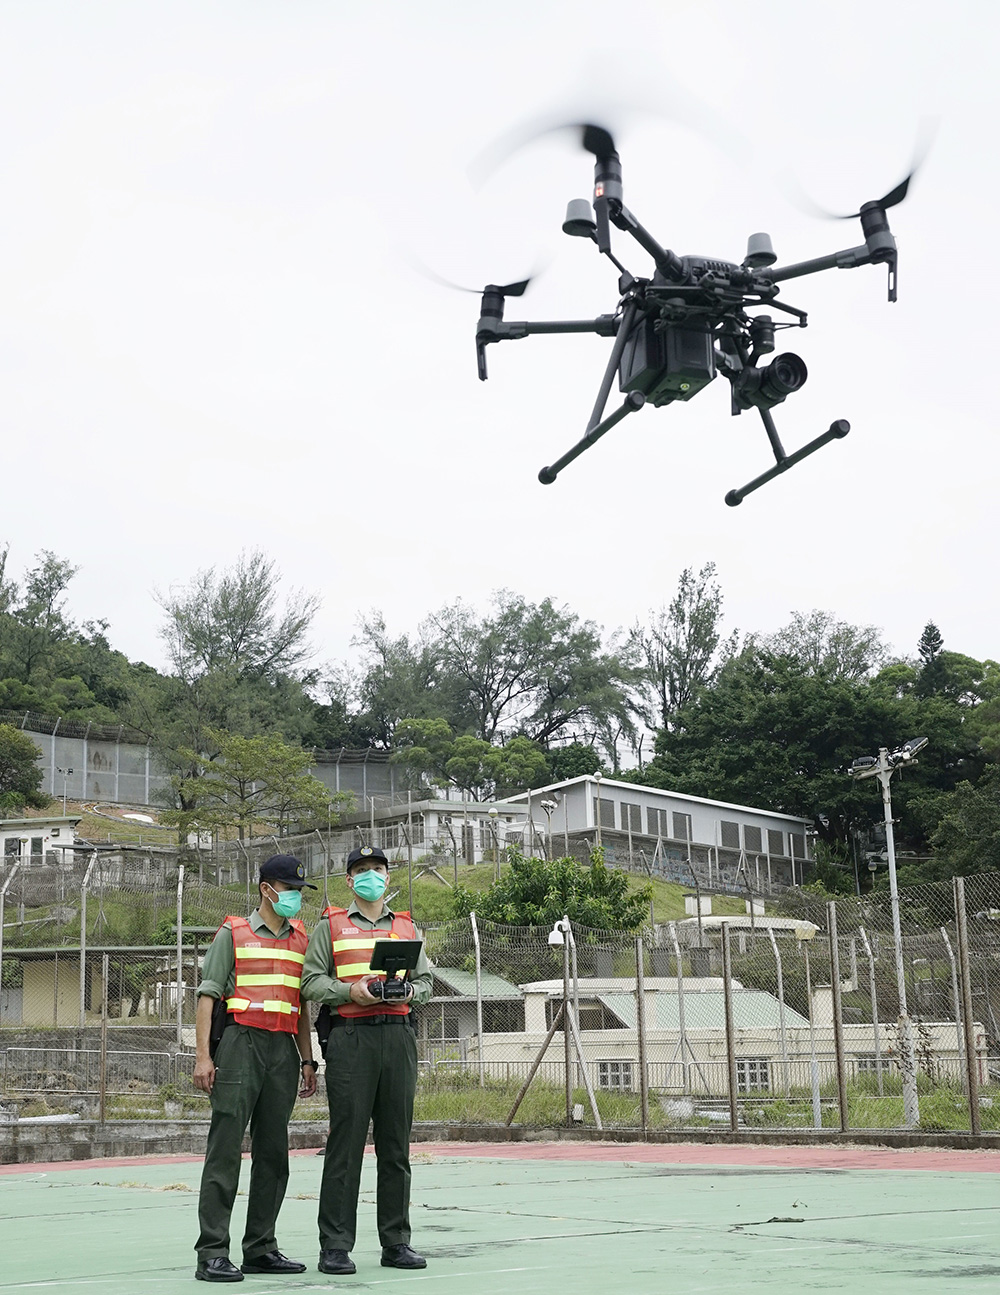 The “Automatic Drone Patrol and Monitoring System” is equipped with an image analytic function.